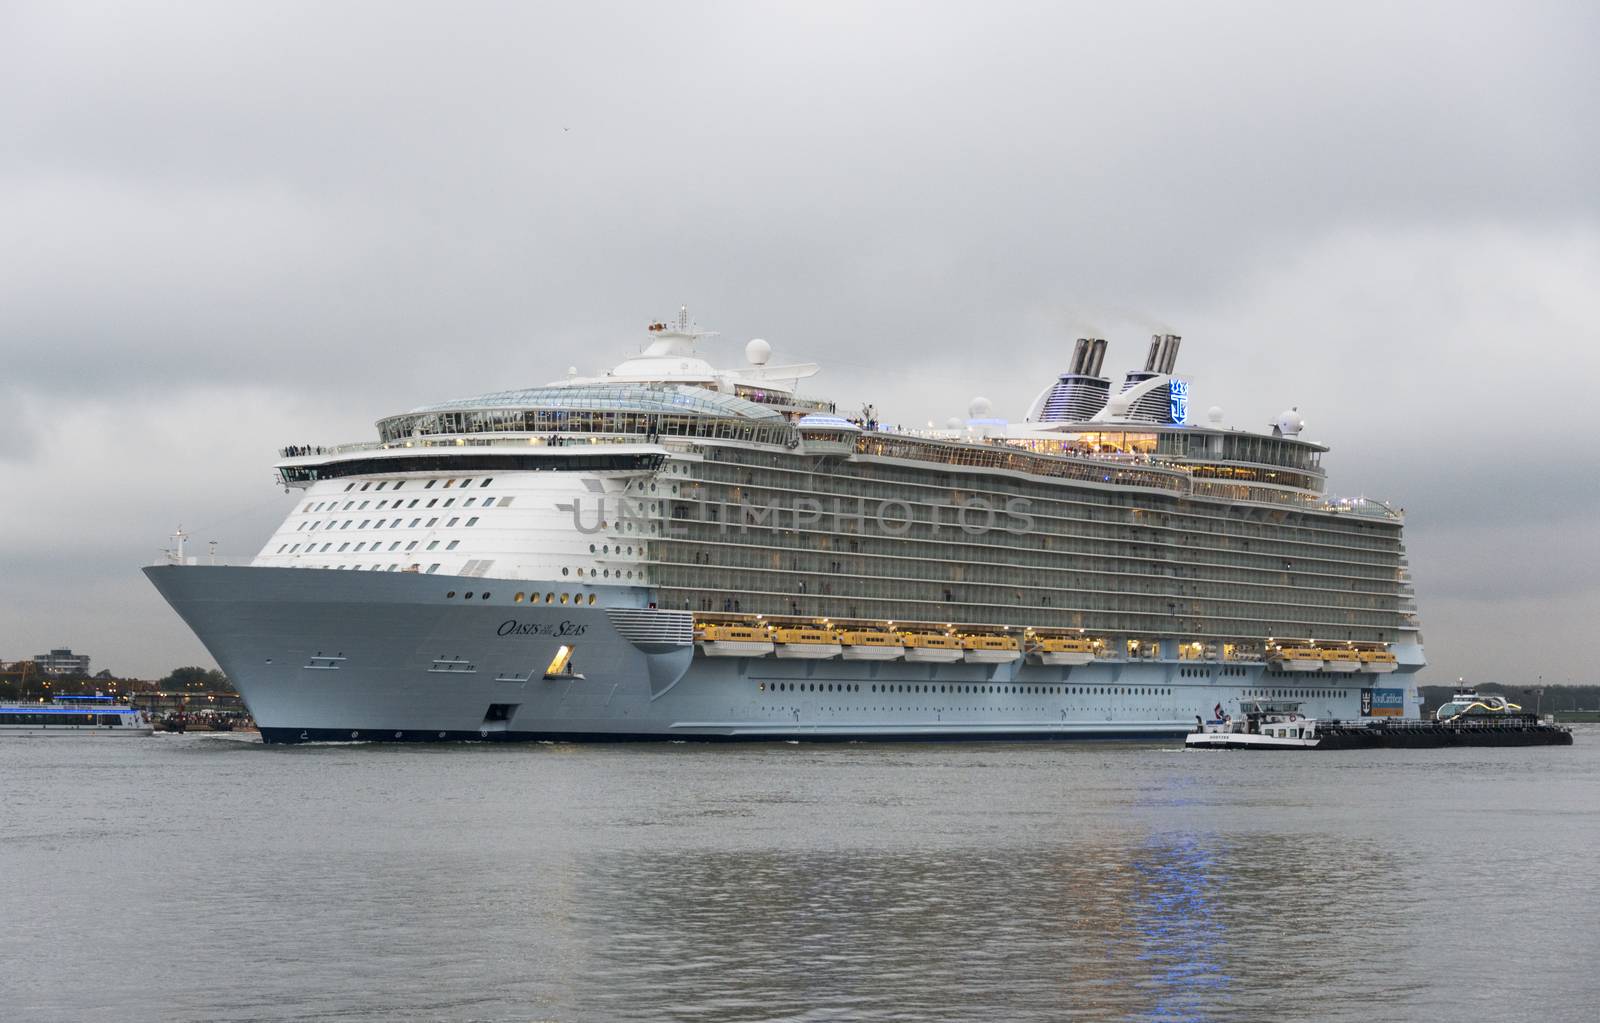 oasis of the seas by compuinfoto